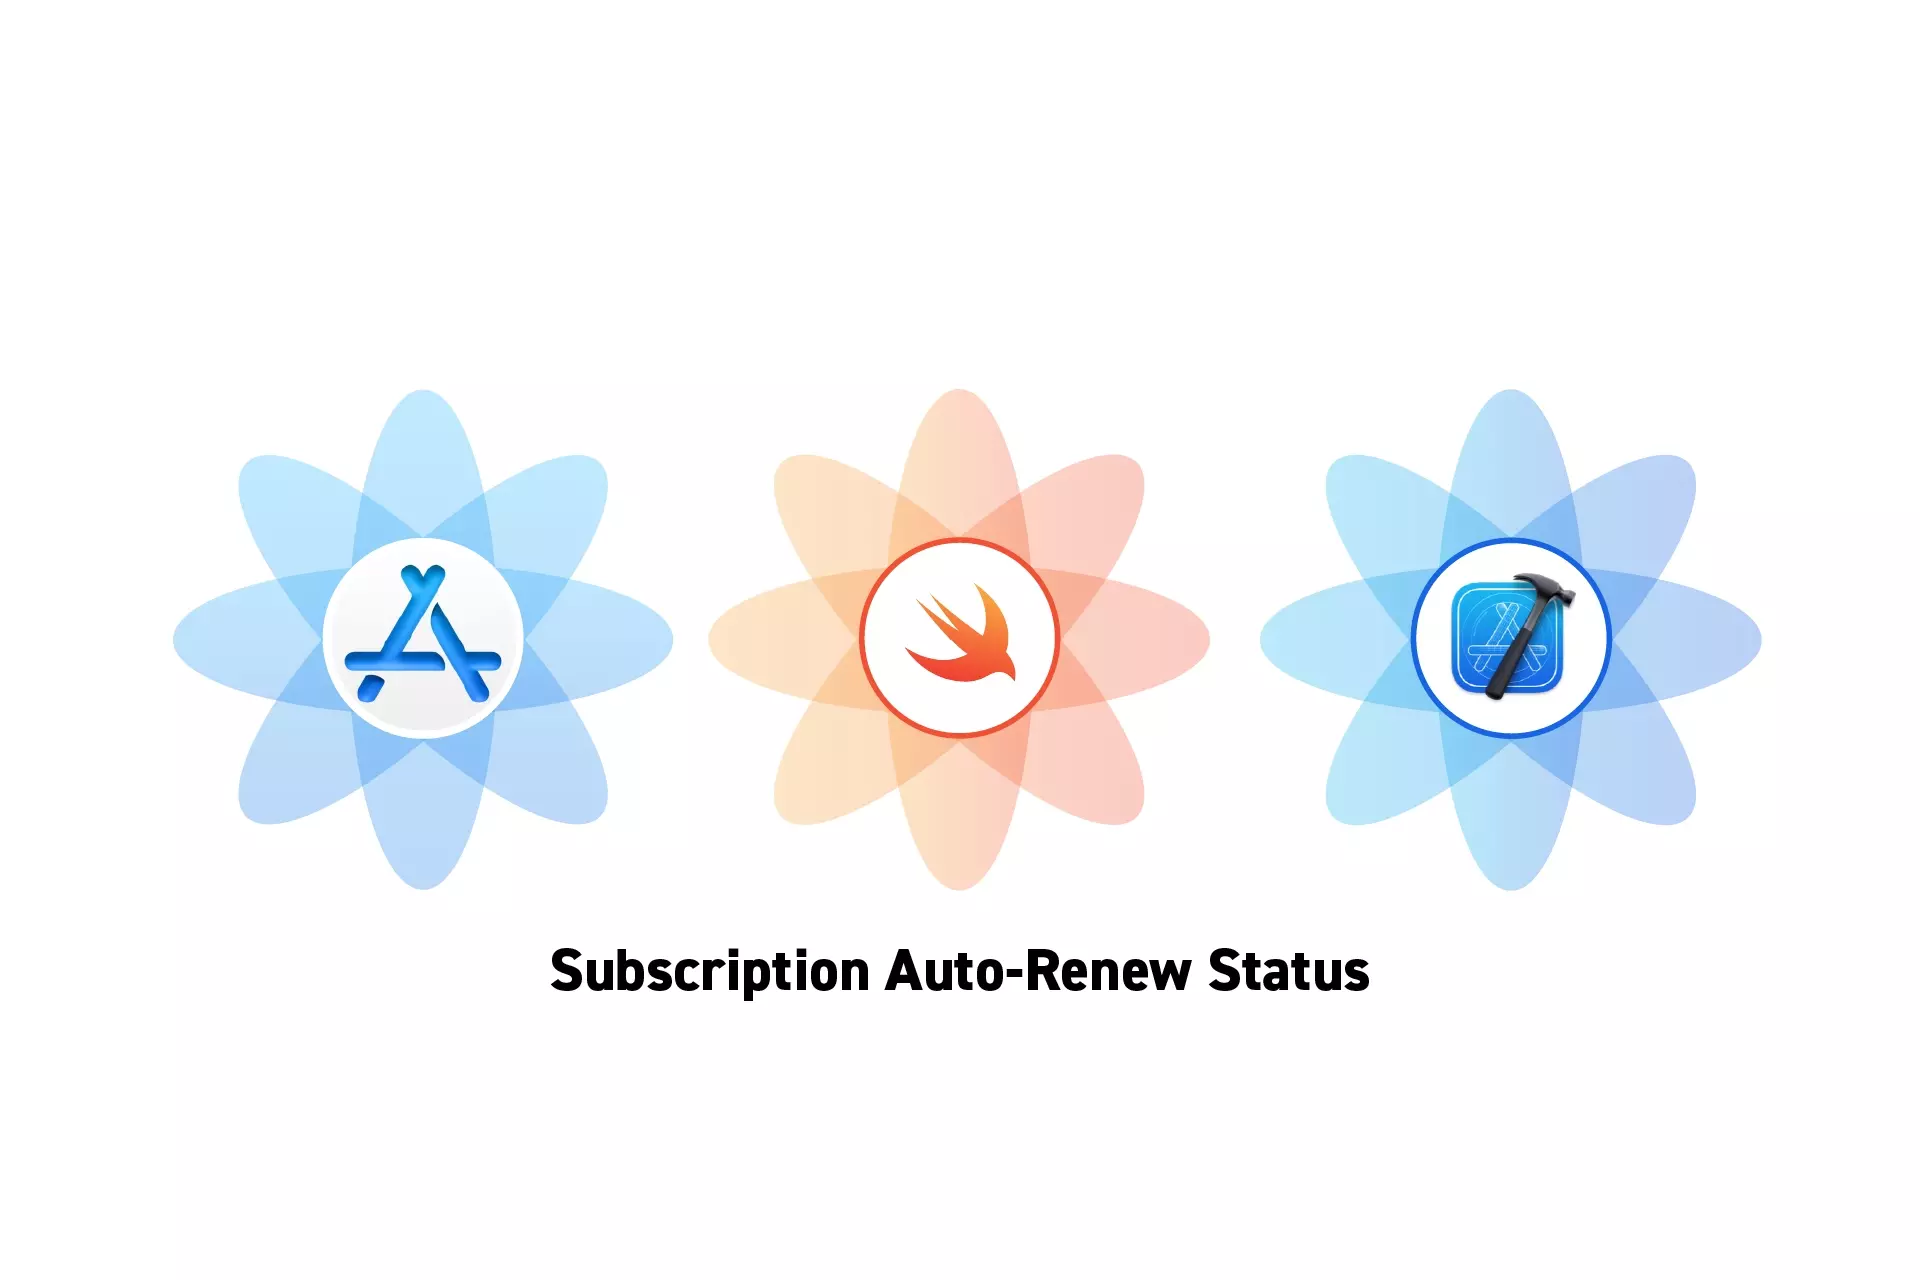 Three flowers that represent StoreKit, Swift and XCode side by side. Beneath them sits the text “Subscription Auto-Renew Status.”